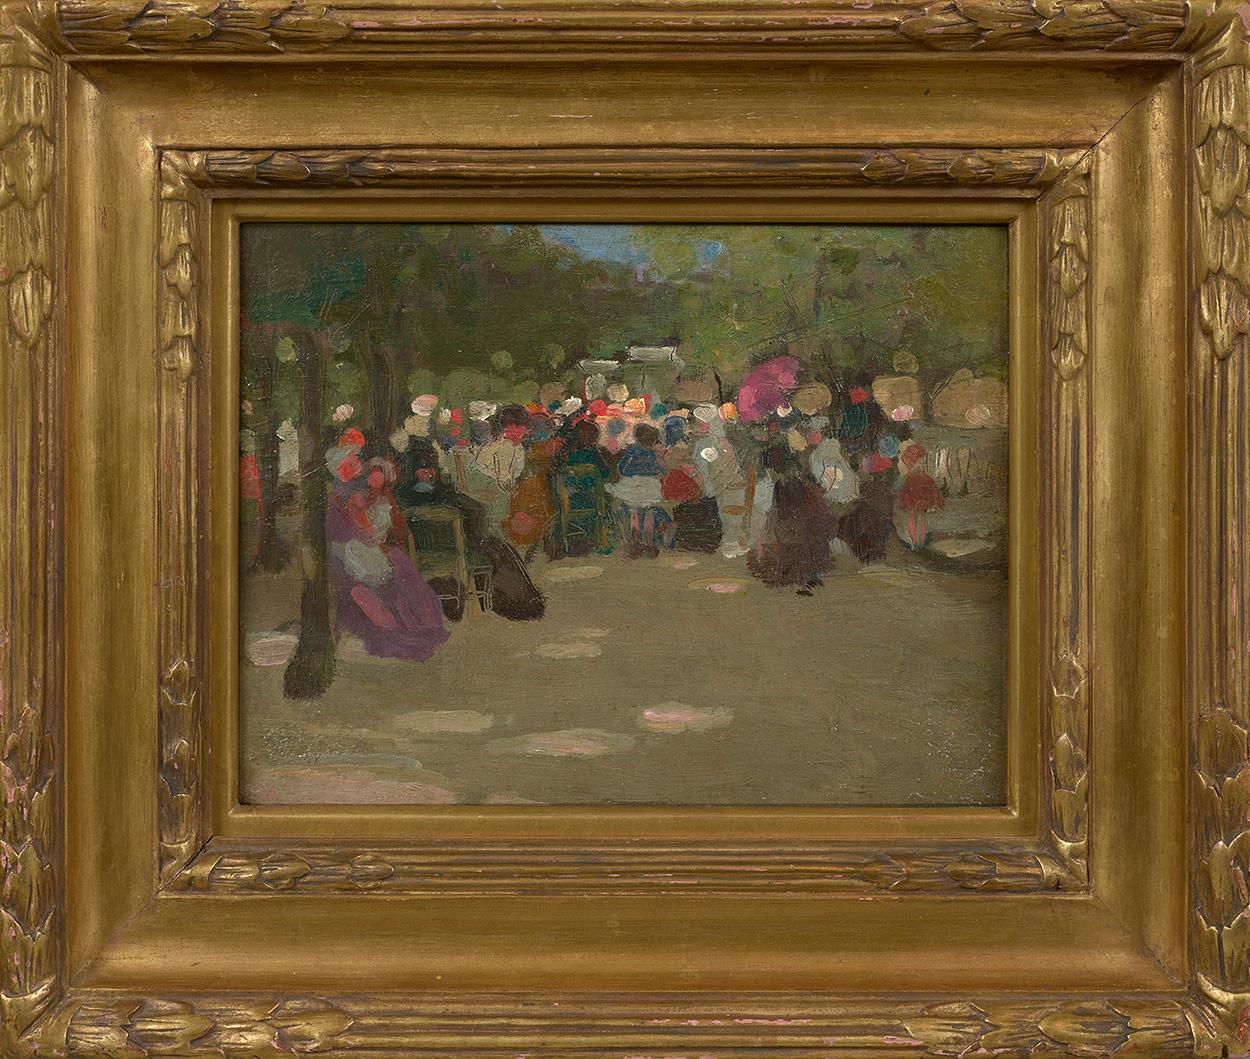 Luxembourg Gardens – Study  - Painting by Frederick Carl Frieseke